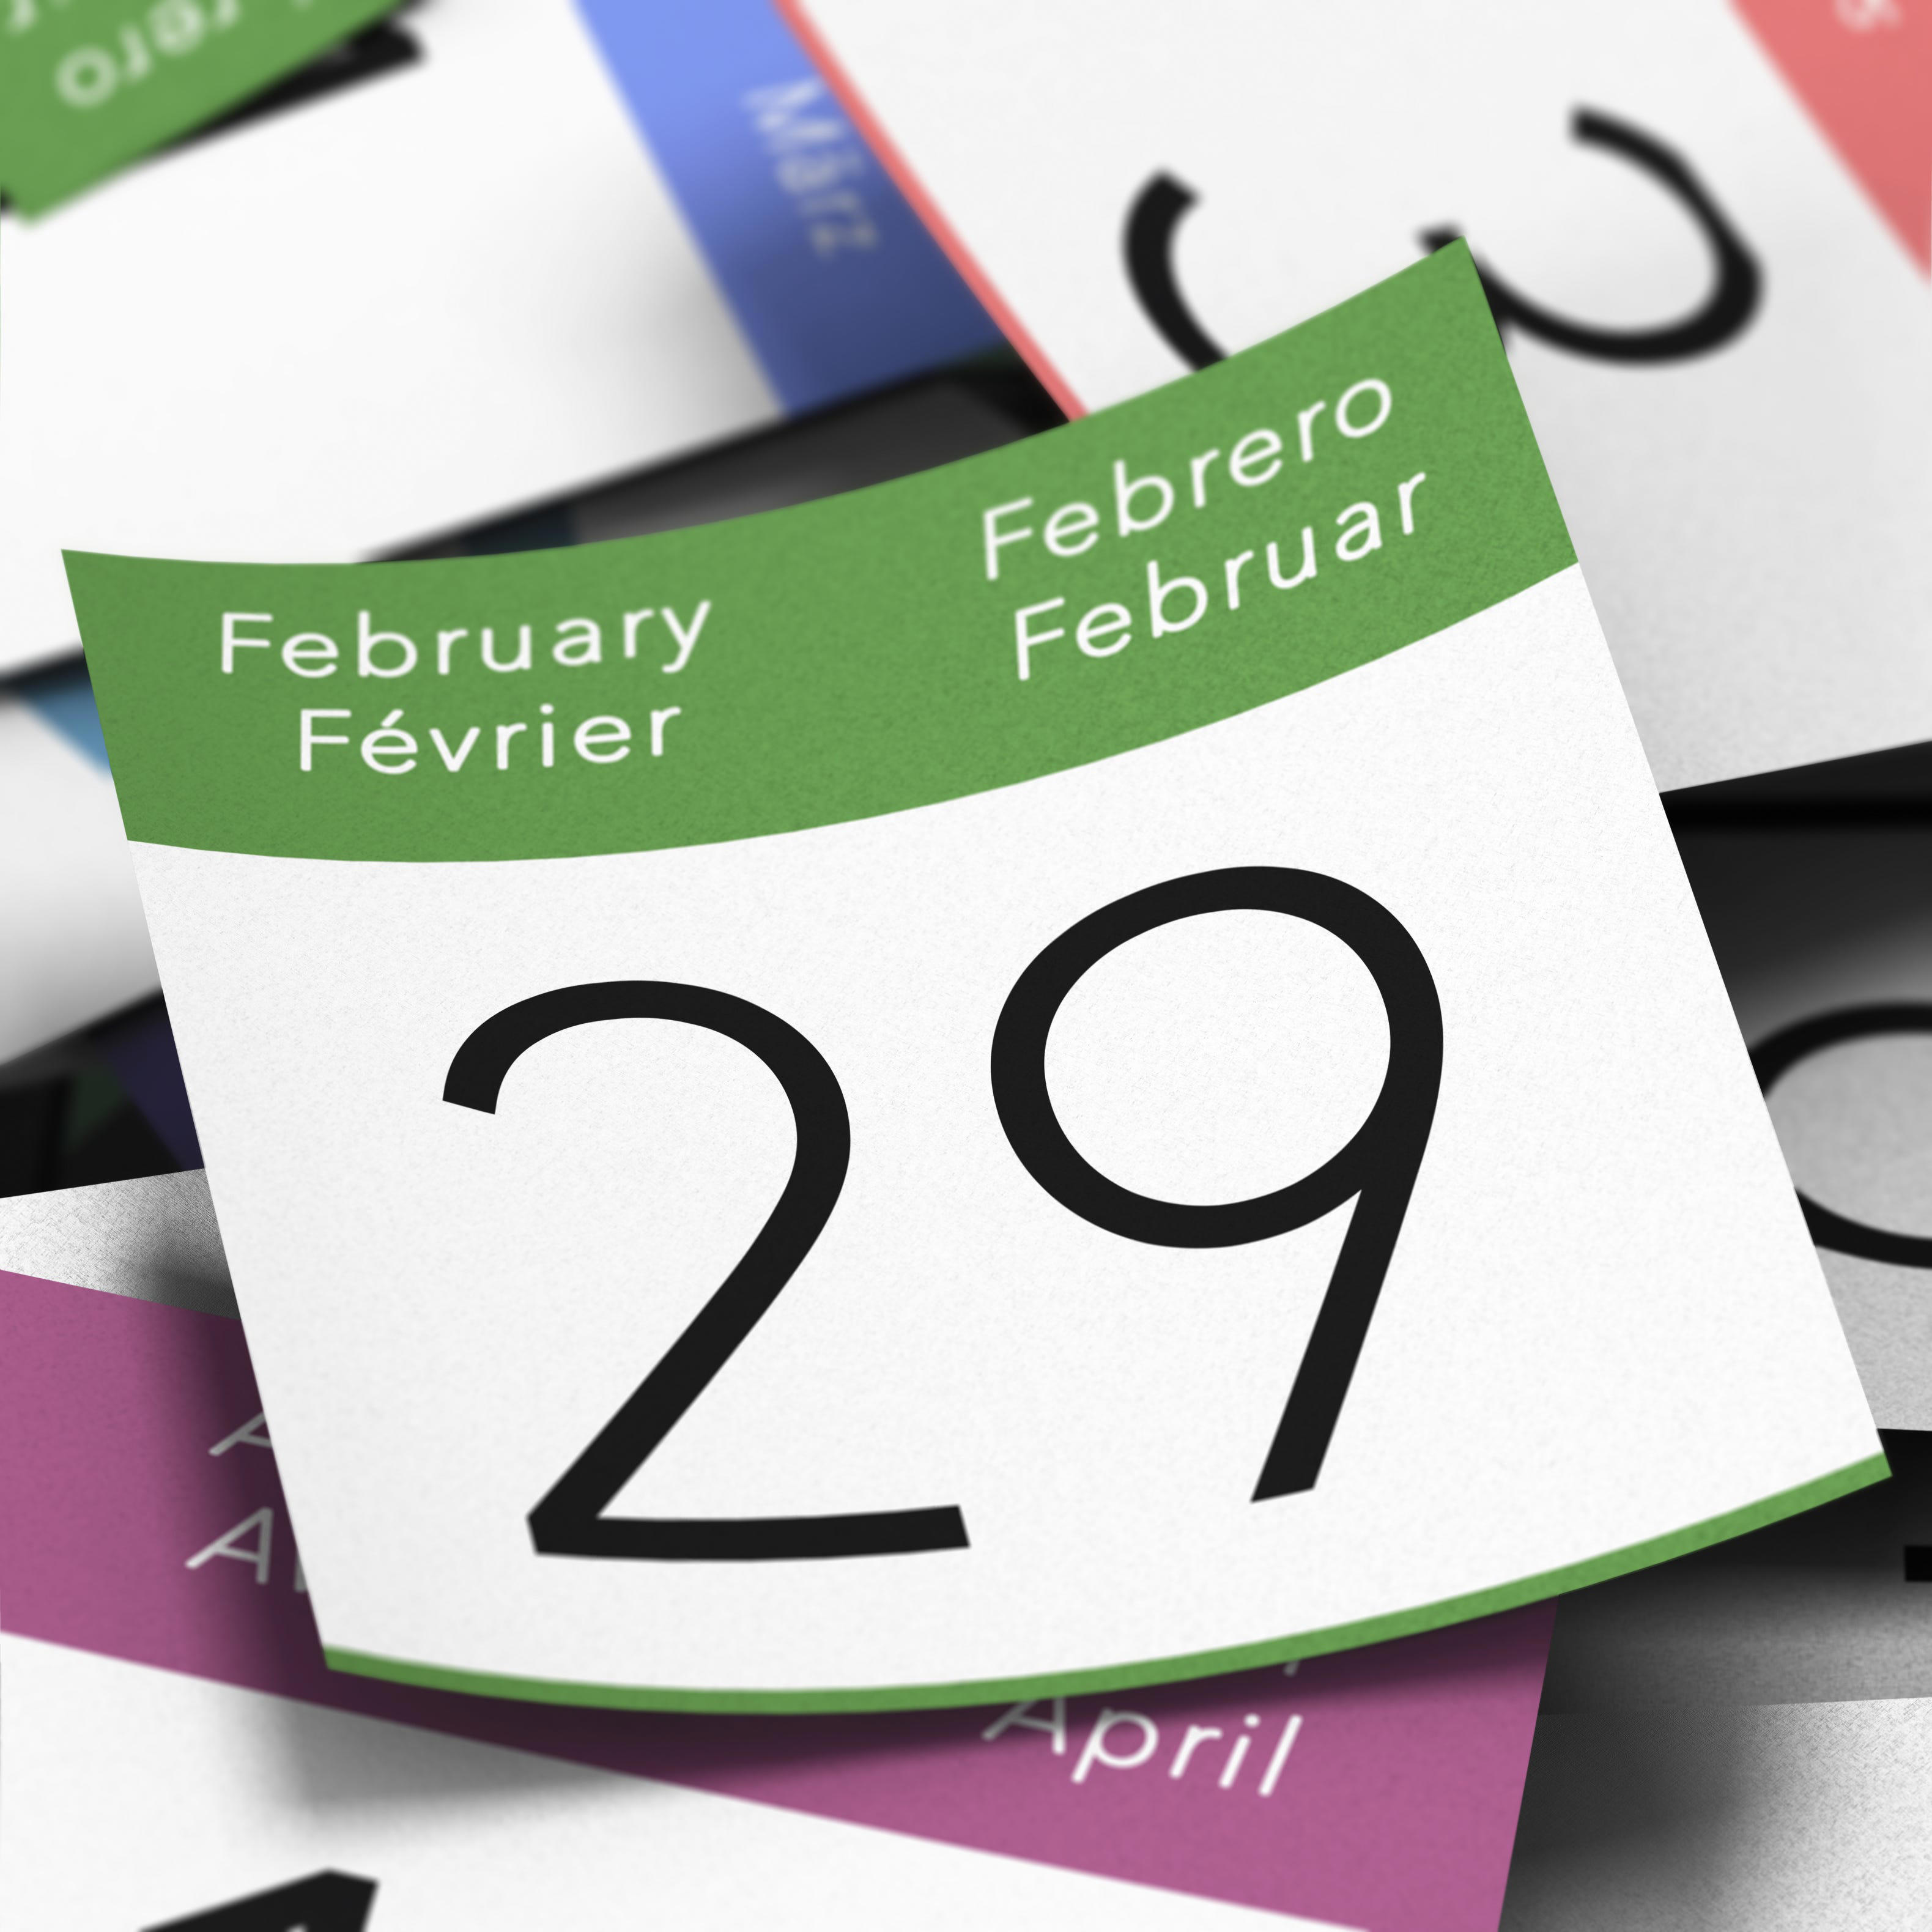 Leap Day birthday math How old would you be if you were born on Leap Day?